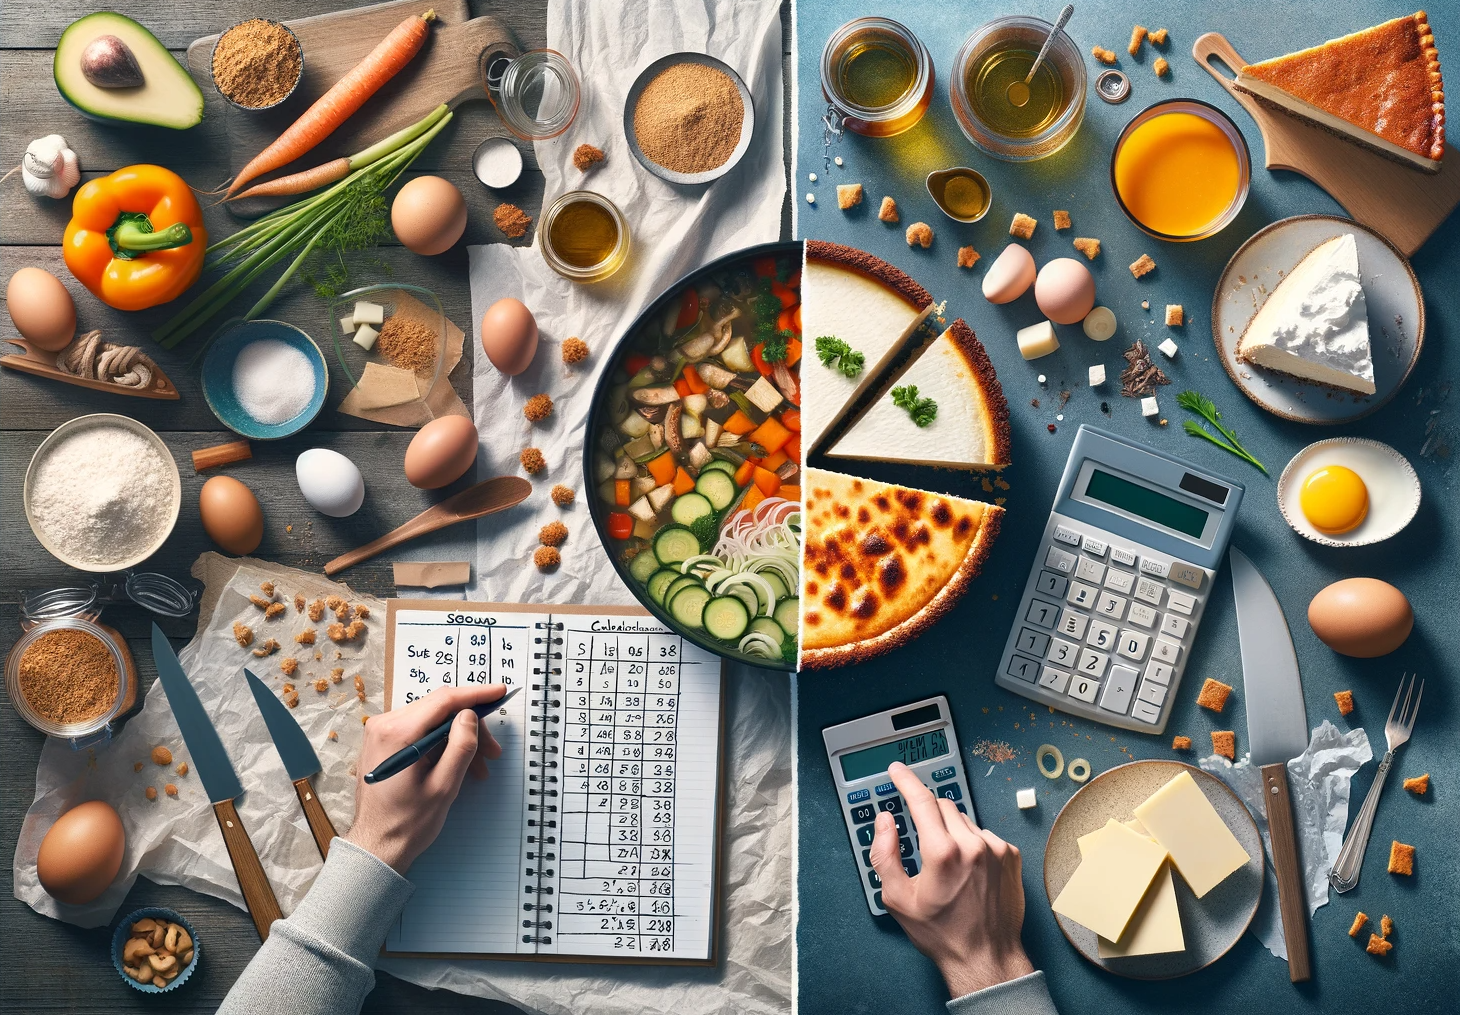 Collage with two culinary themes. On the left, there's a scene of a person calculating the calorie content of a homemade soup with a variety of ingredients like vegetables, meat, and broth. This person is using a calculator and a notepad in a kitchen setting with an array of soup ingredients displayed. The individual appears engaged in jotting down numbers thoughtfully. On the right, a different scene unfolds where another person is analyzing a cheesecake, working on breaking down its ingredients - cream cheese, sugar, eggs, and graham crackers - and calculating the calories and carbohydrates per slice. This part of the image shows a kitchen with a whole cheesecake, a knife set to slice it, alongside a notebook and a calculator, indicating a meticulous nutritional analysis.